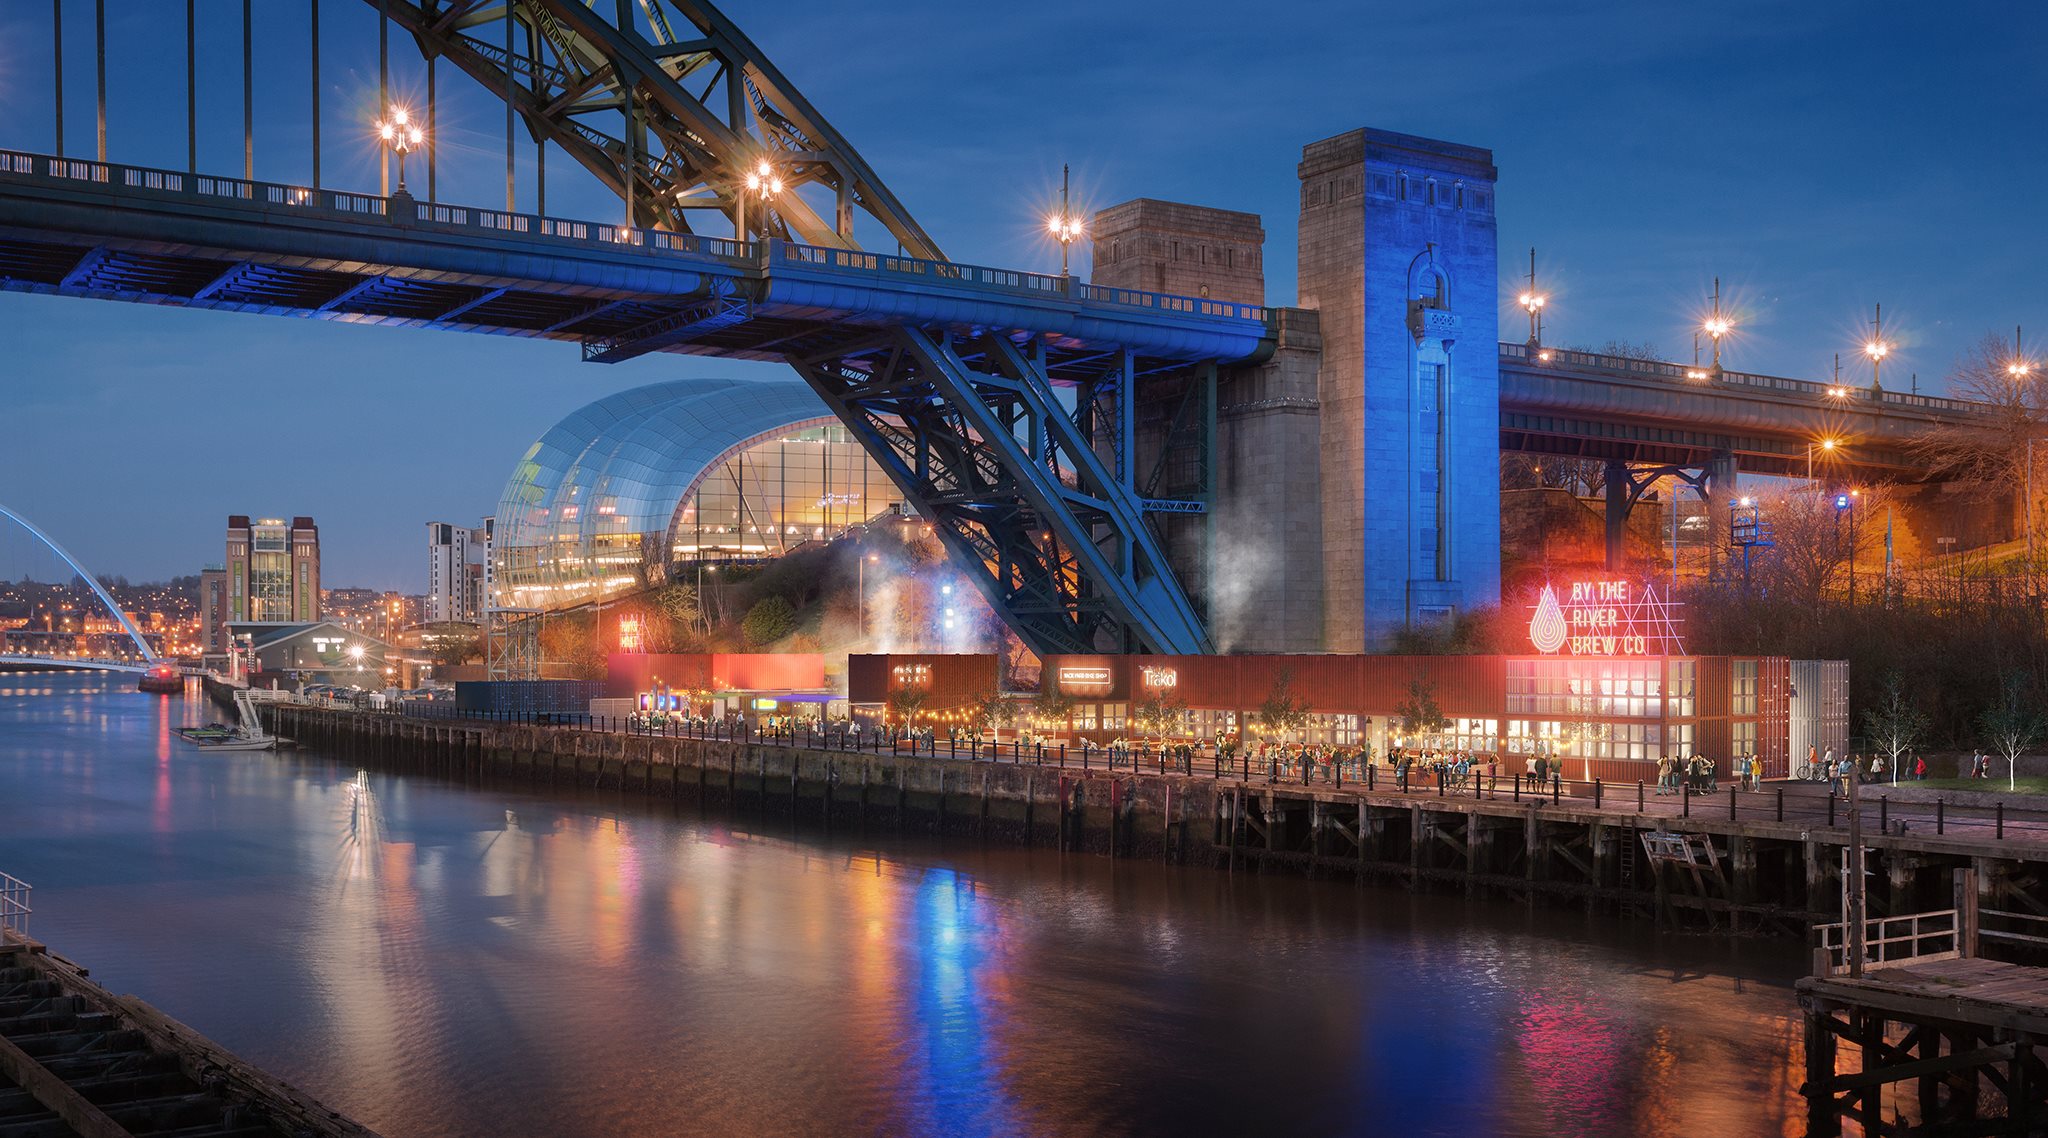 A view of By the River Brew Co. and the Tyne Bridge at dusk